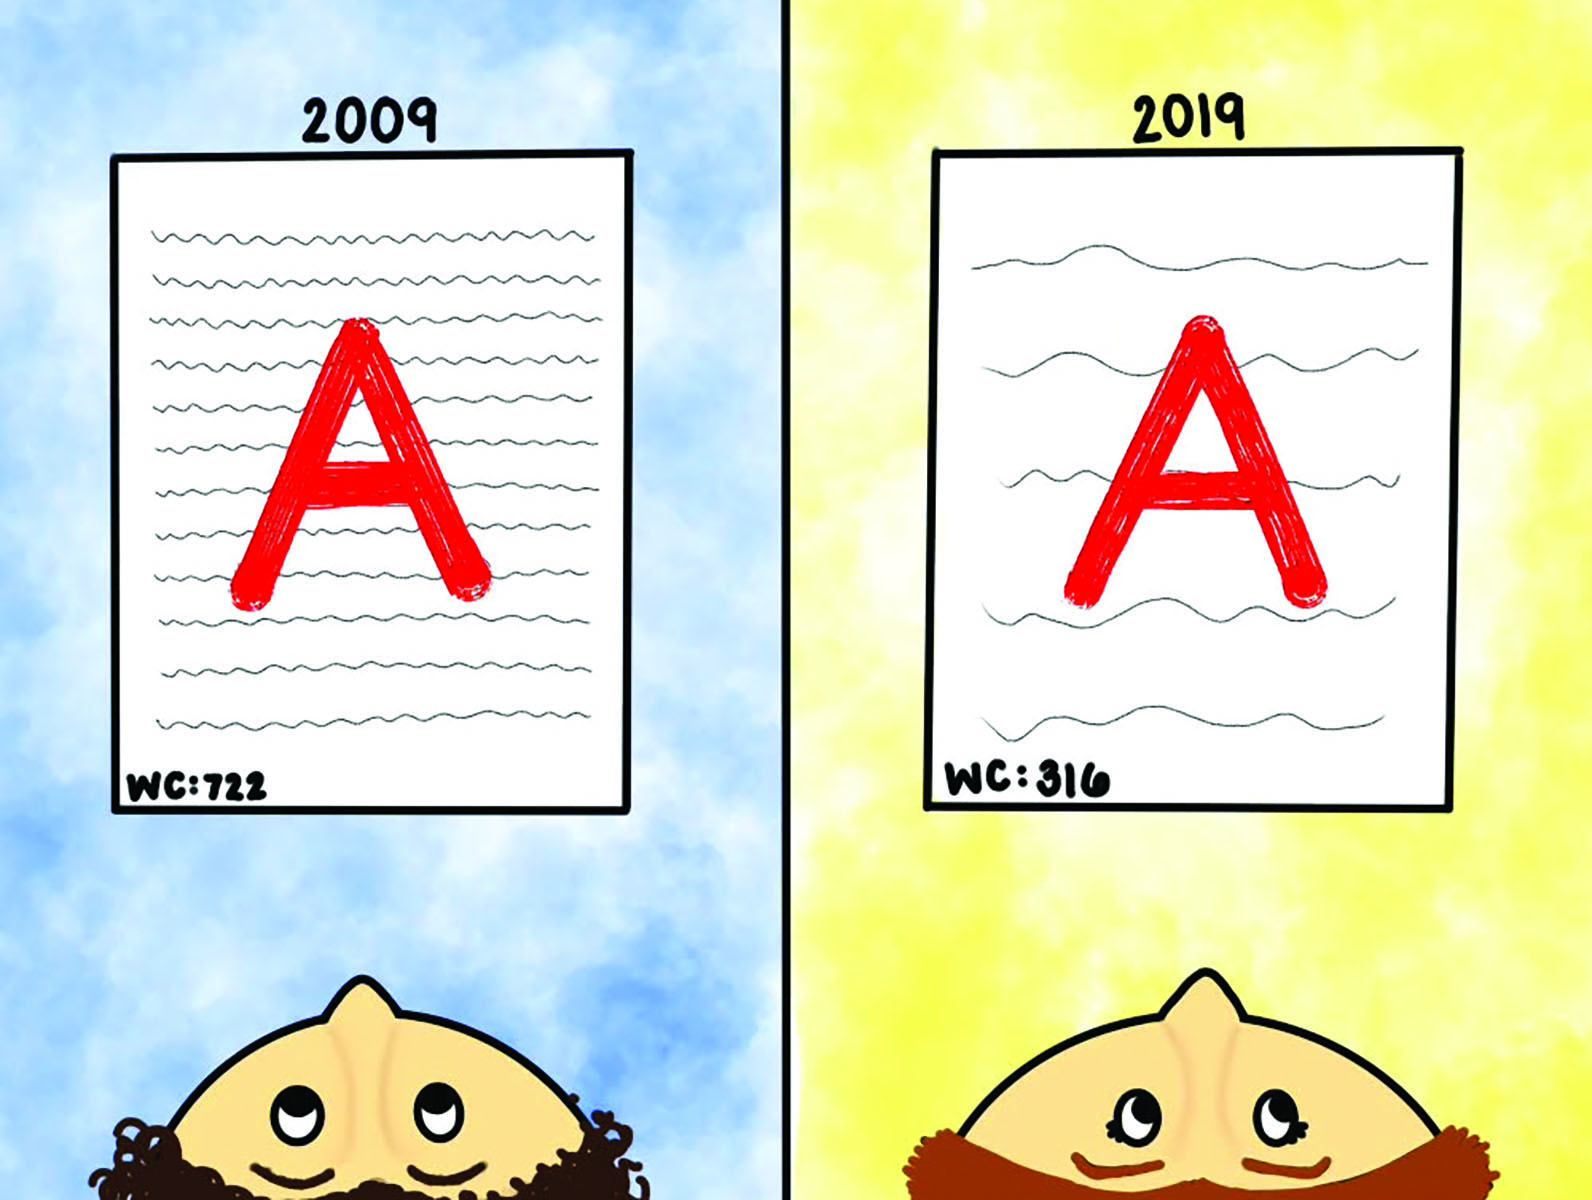 Grade inflation occurs when students receive higher grades without a similar increase in content mastery. Some students across the country have also noticed a decrease in class expectations and rigor. Graphic by Maribelle Lee